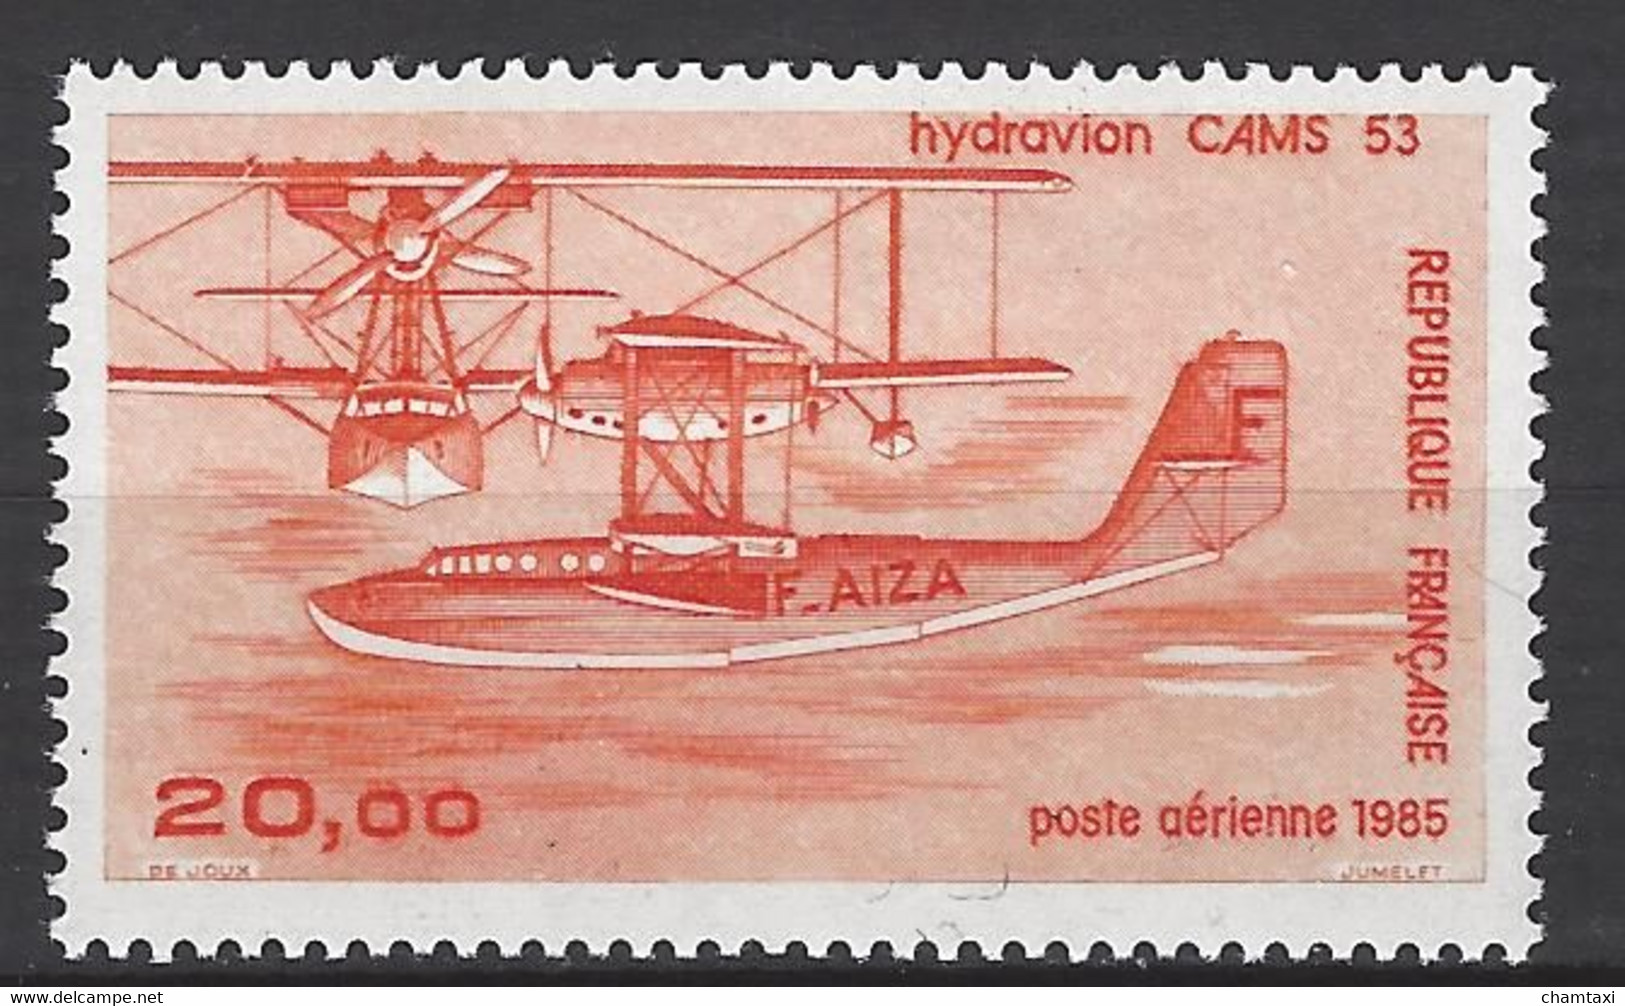 FRANCE 1895 TIMBRE POSTE AERIENNE 58b HYDRAVION CAMS 53 - Luchtpost